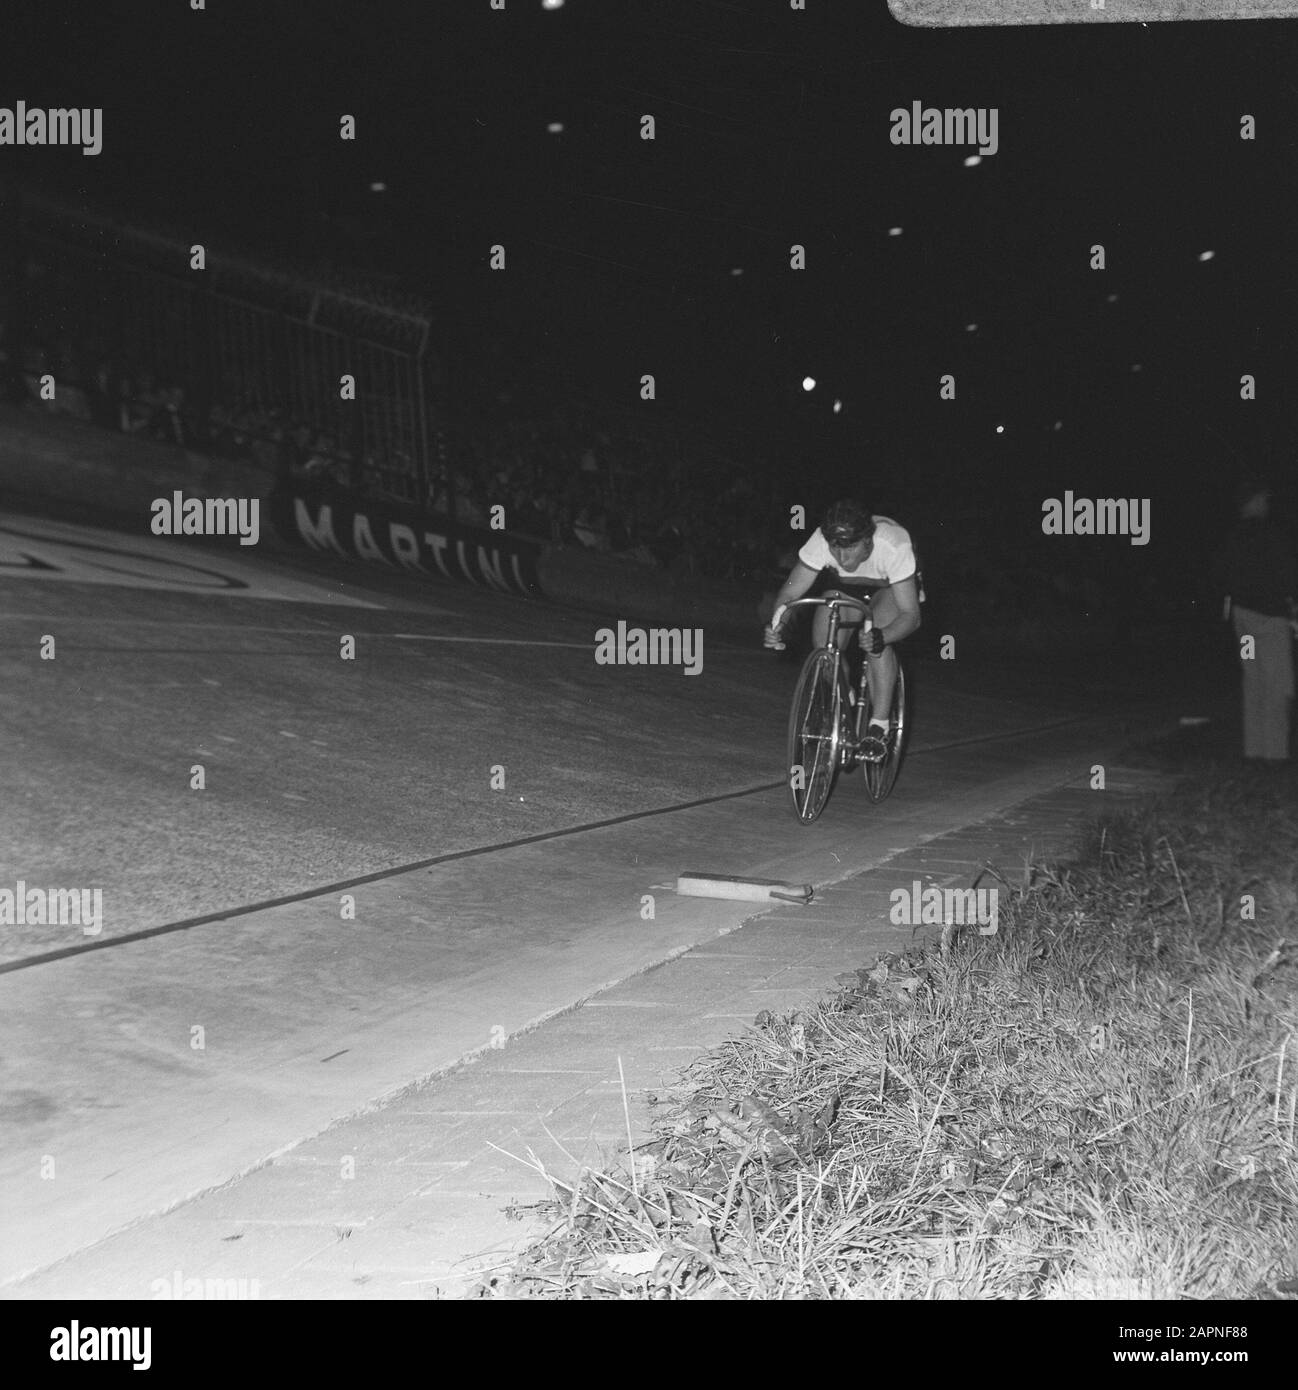 World Cycling Championships, chase ladies. Garkouchina in action Date: 24 August 1967 Location: Amsterdam Keywords: track cycling, sport Personal name: Garkouchina, Tamara Stock Photo